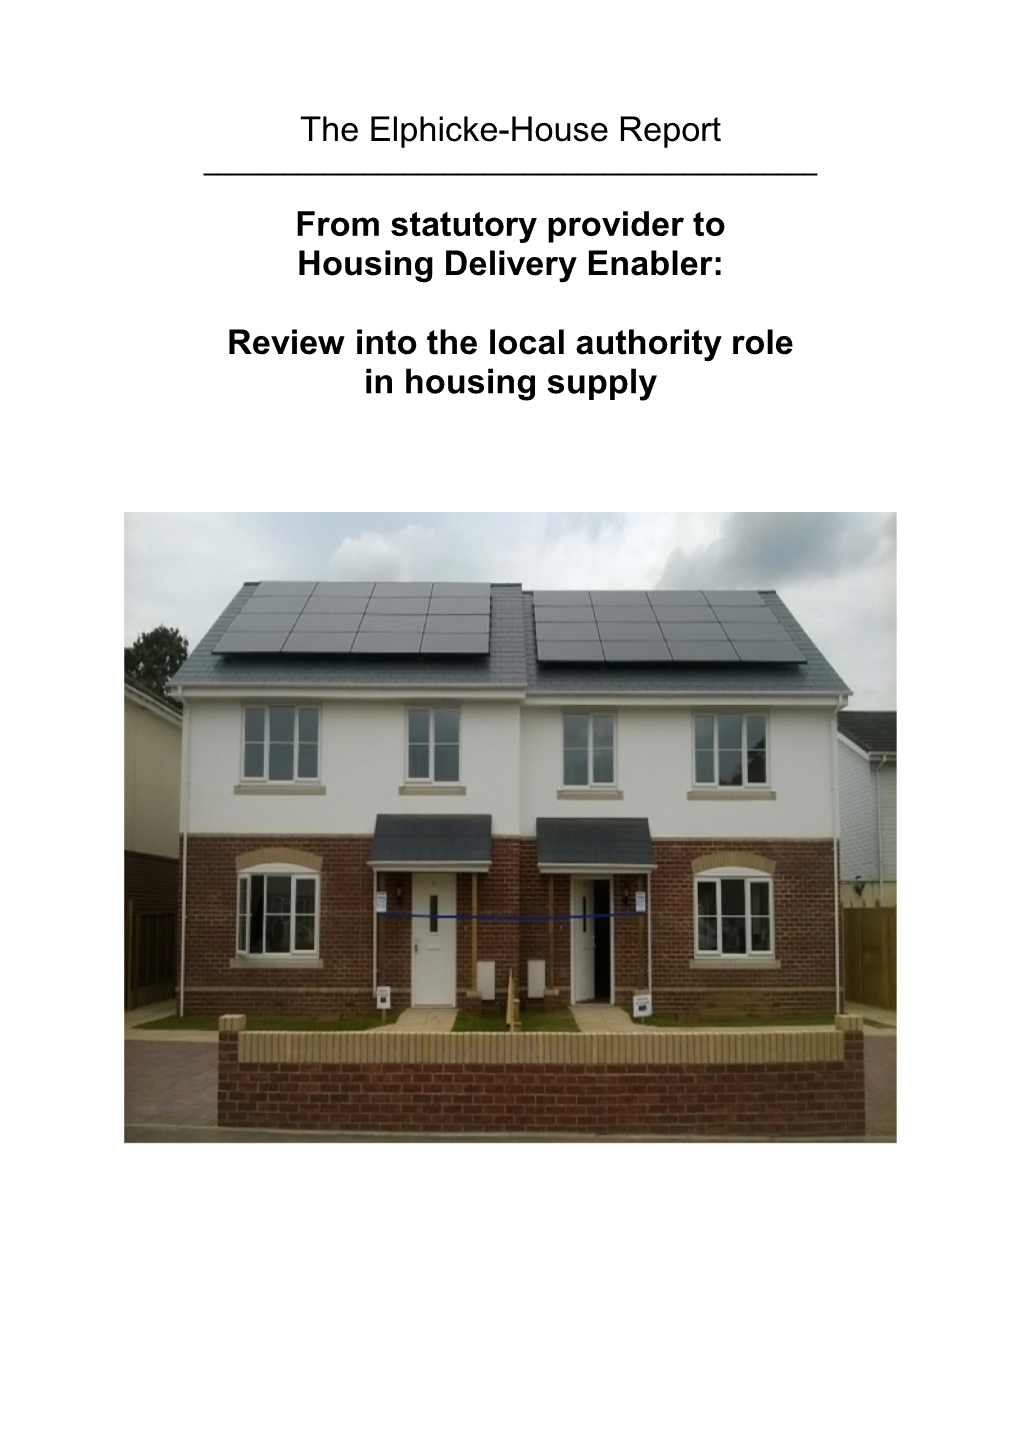 The Elphicke-House Report: from Statutory Provider to Housing Delivery